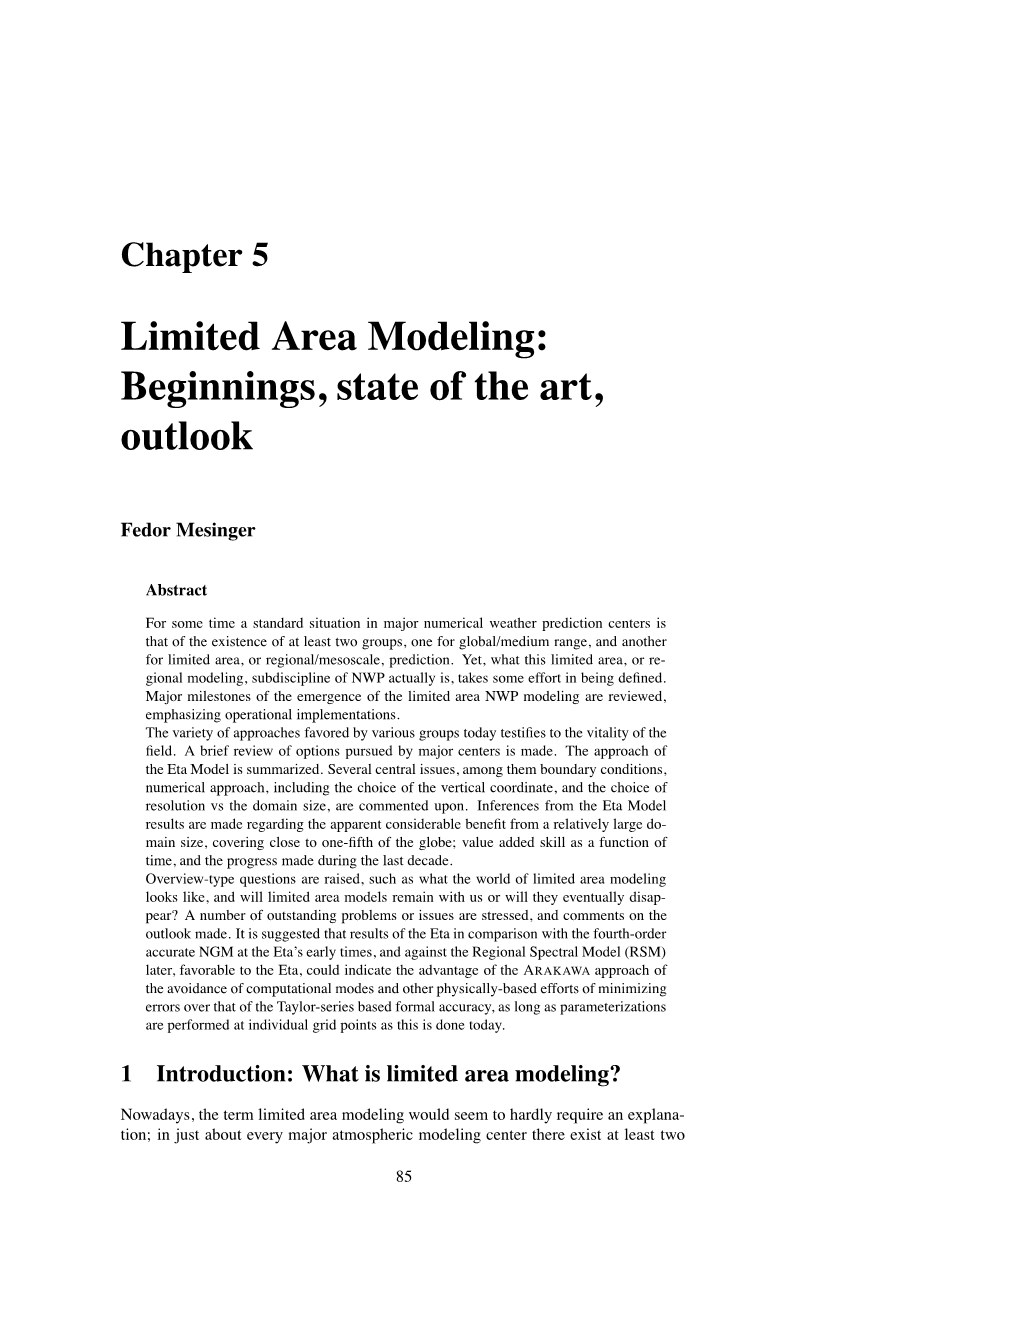 Limited Area Modeling: Beginnings, State of the Art, Outlook